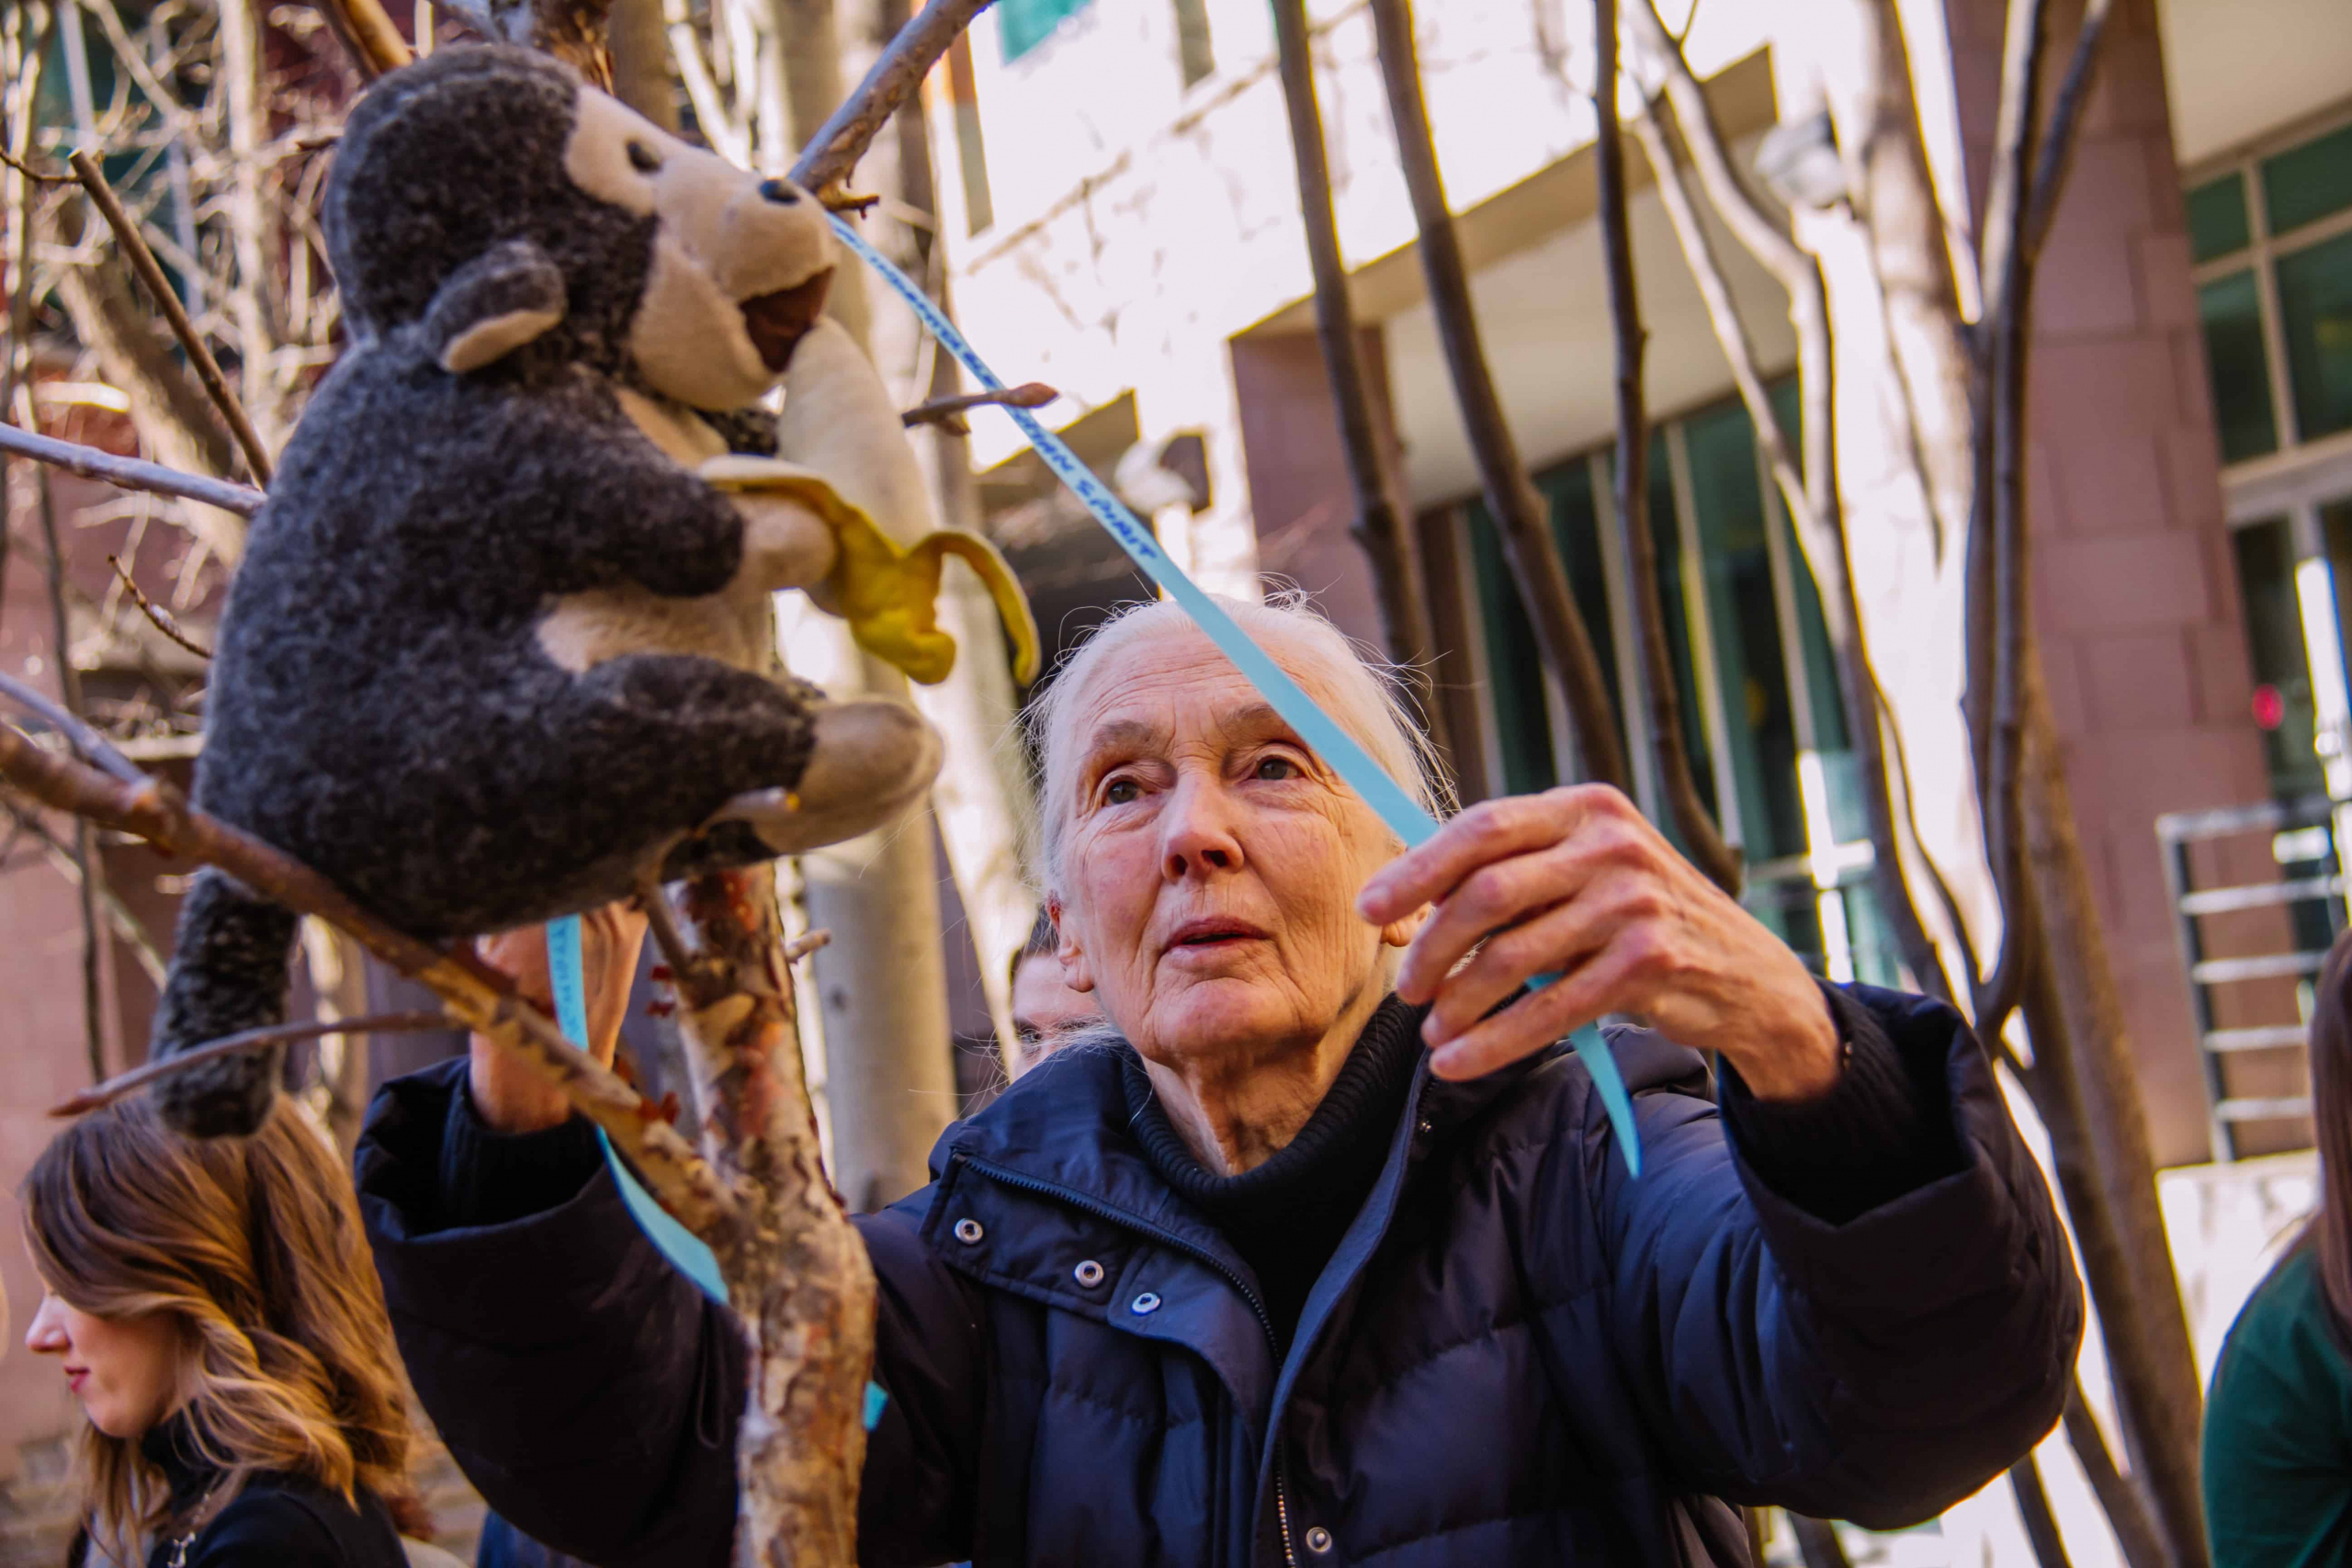 Jane Goodall and Mr. H tying a ribbon on the Tree of Hope. PHOTO BY NICK TIRINGER/COURTESY OF THE JANE GOODALL INSTITUTE OF CANADA.